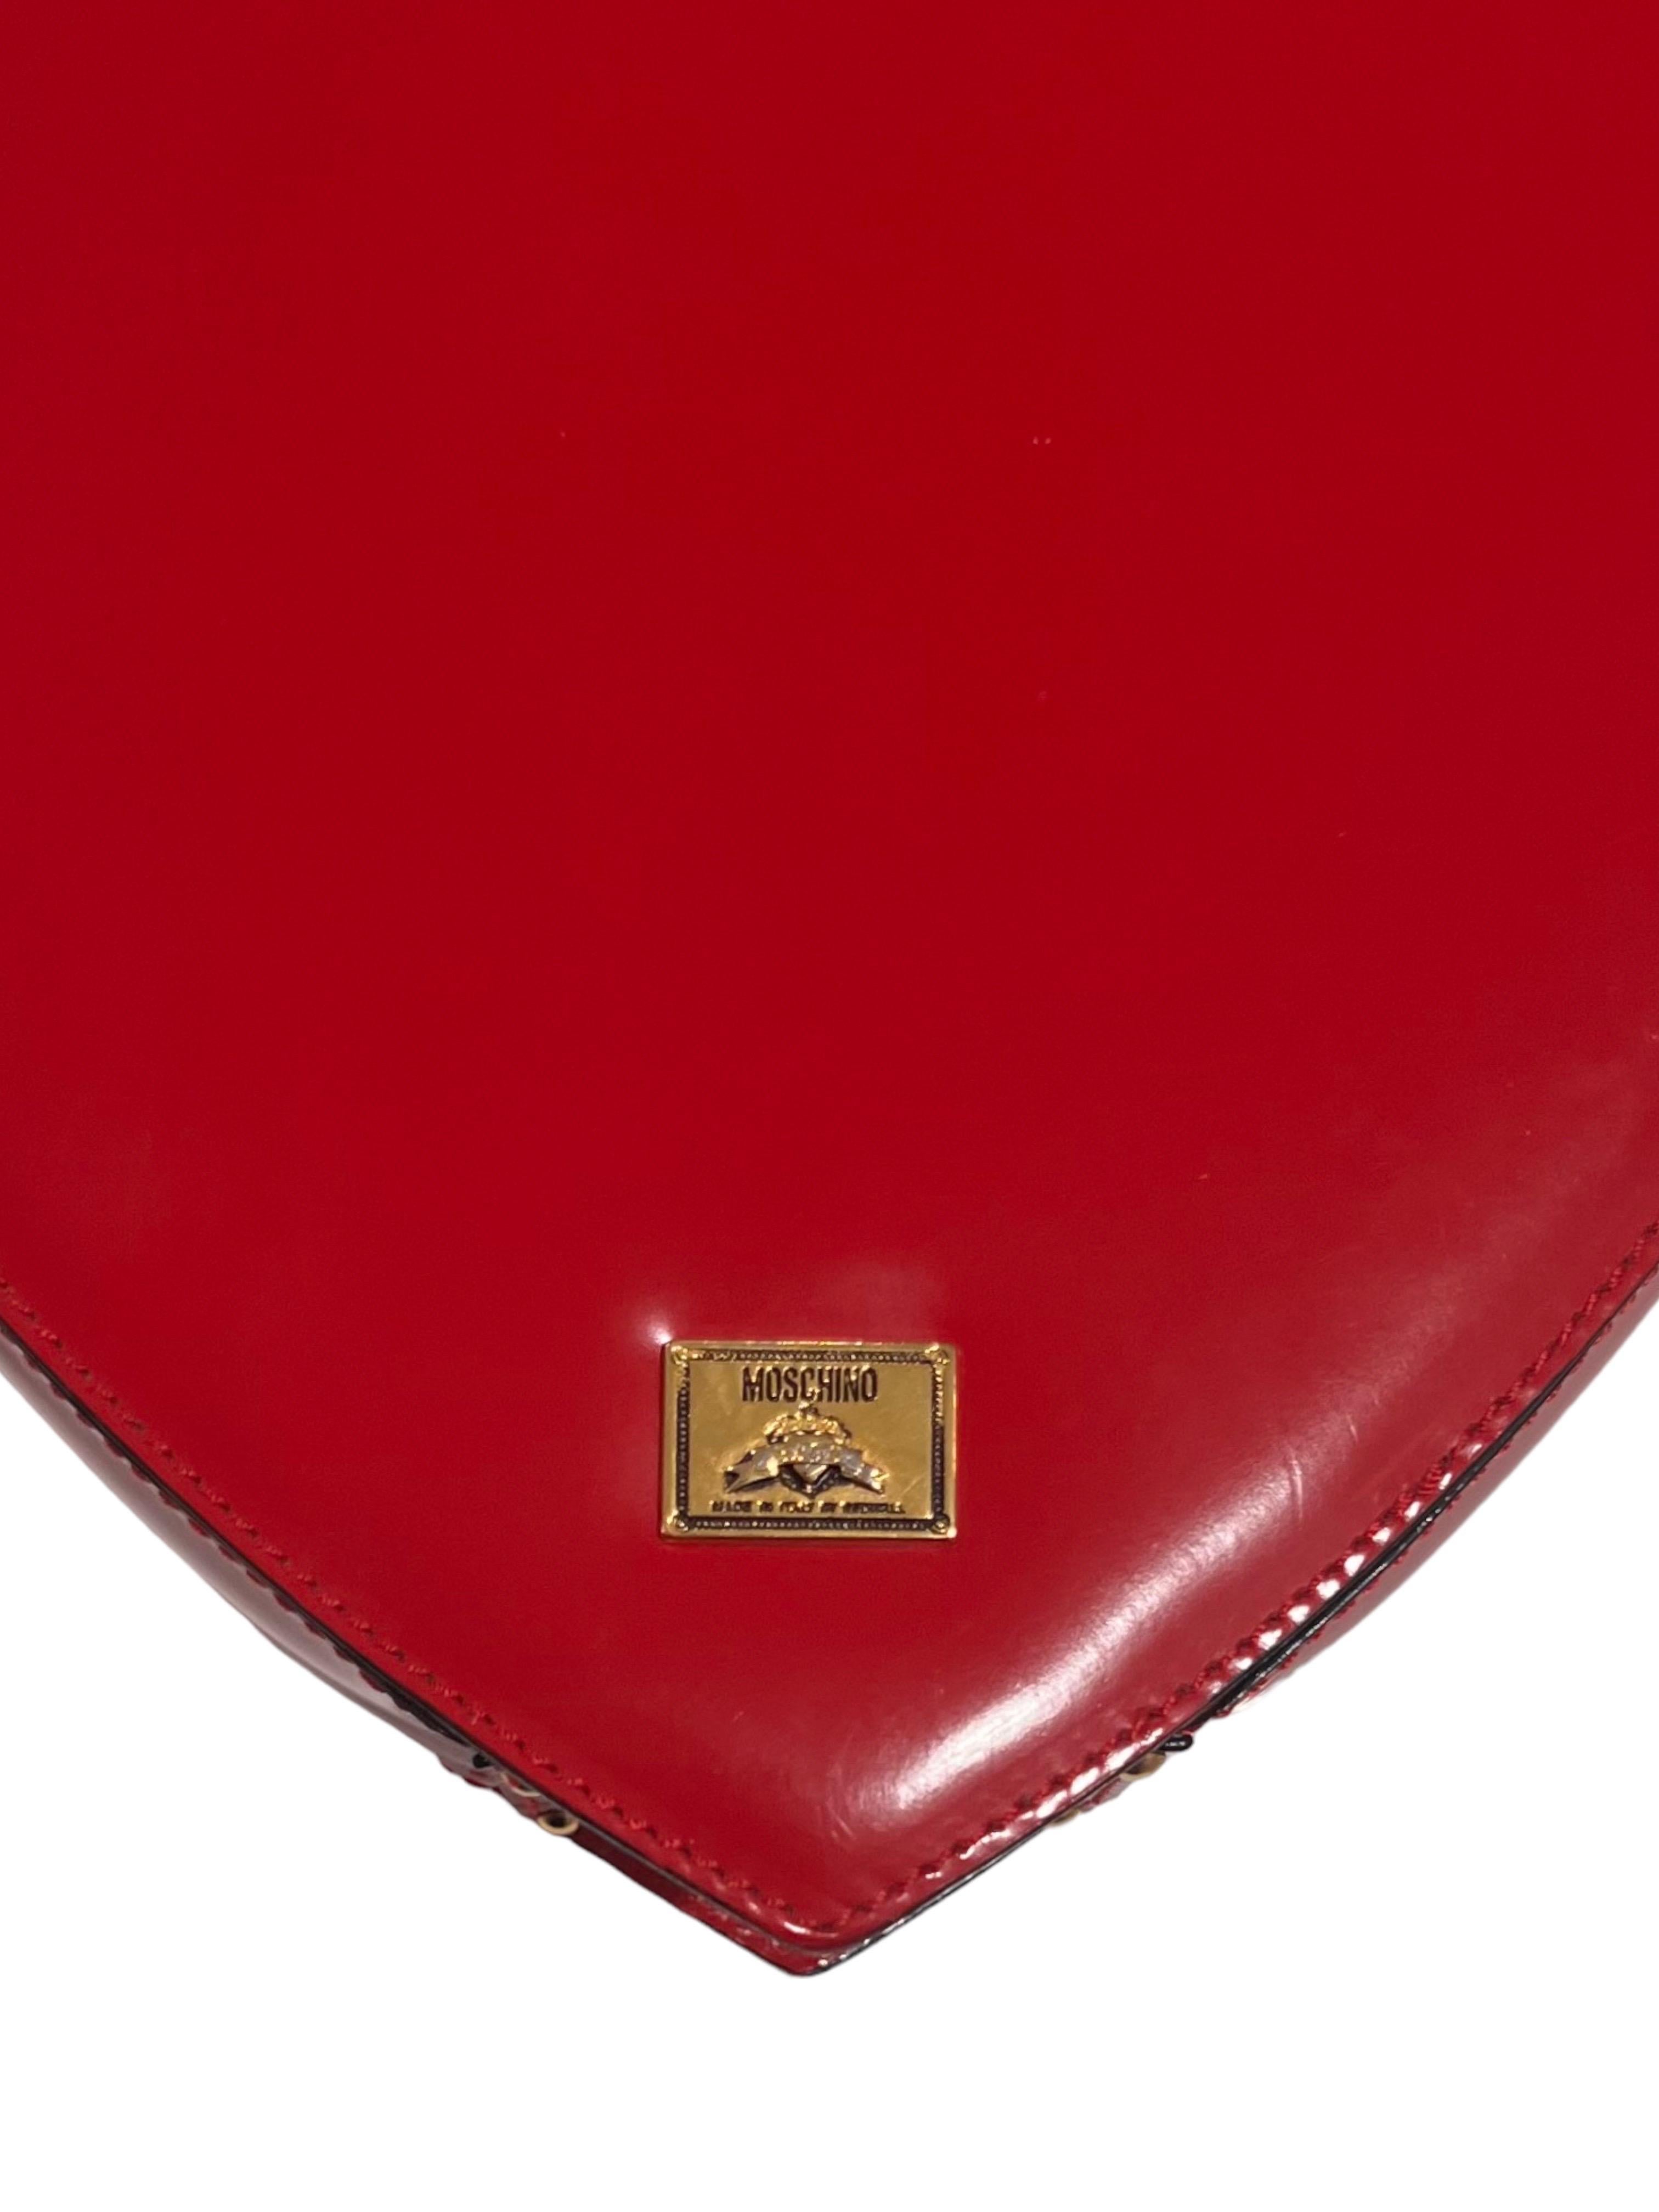 1990's Moschino Red Leather Heart Bag seen on The Nanny 1